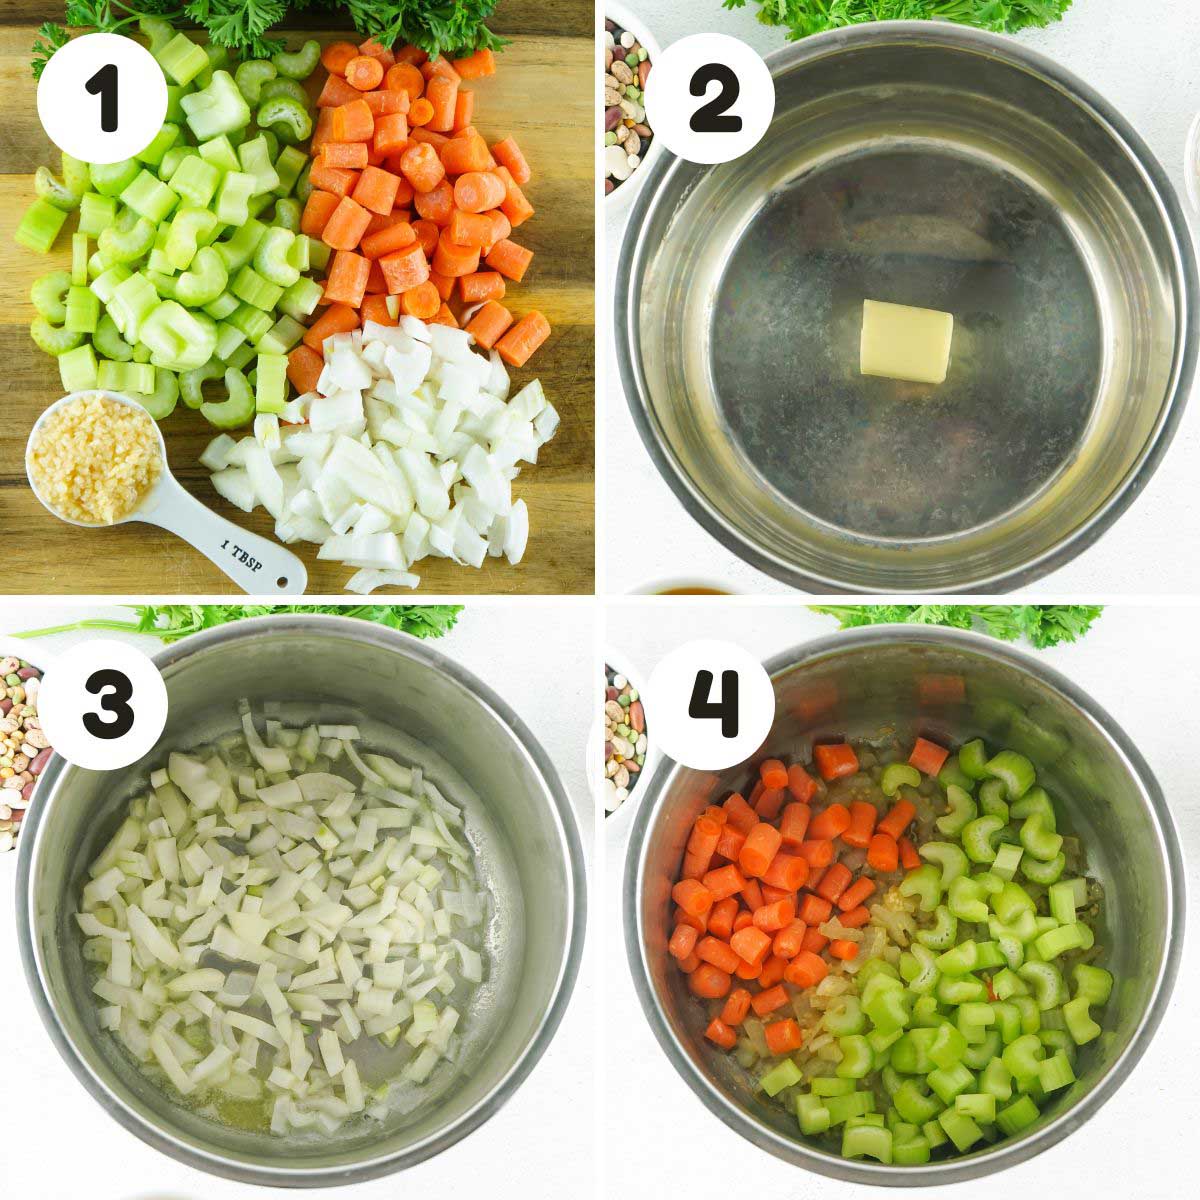 Steps to make the bean soup.